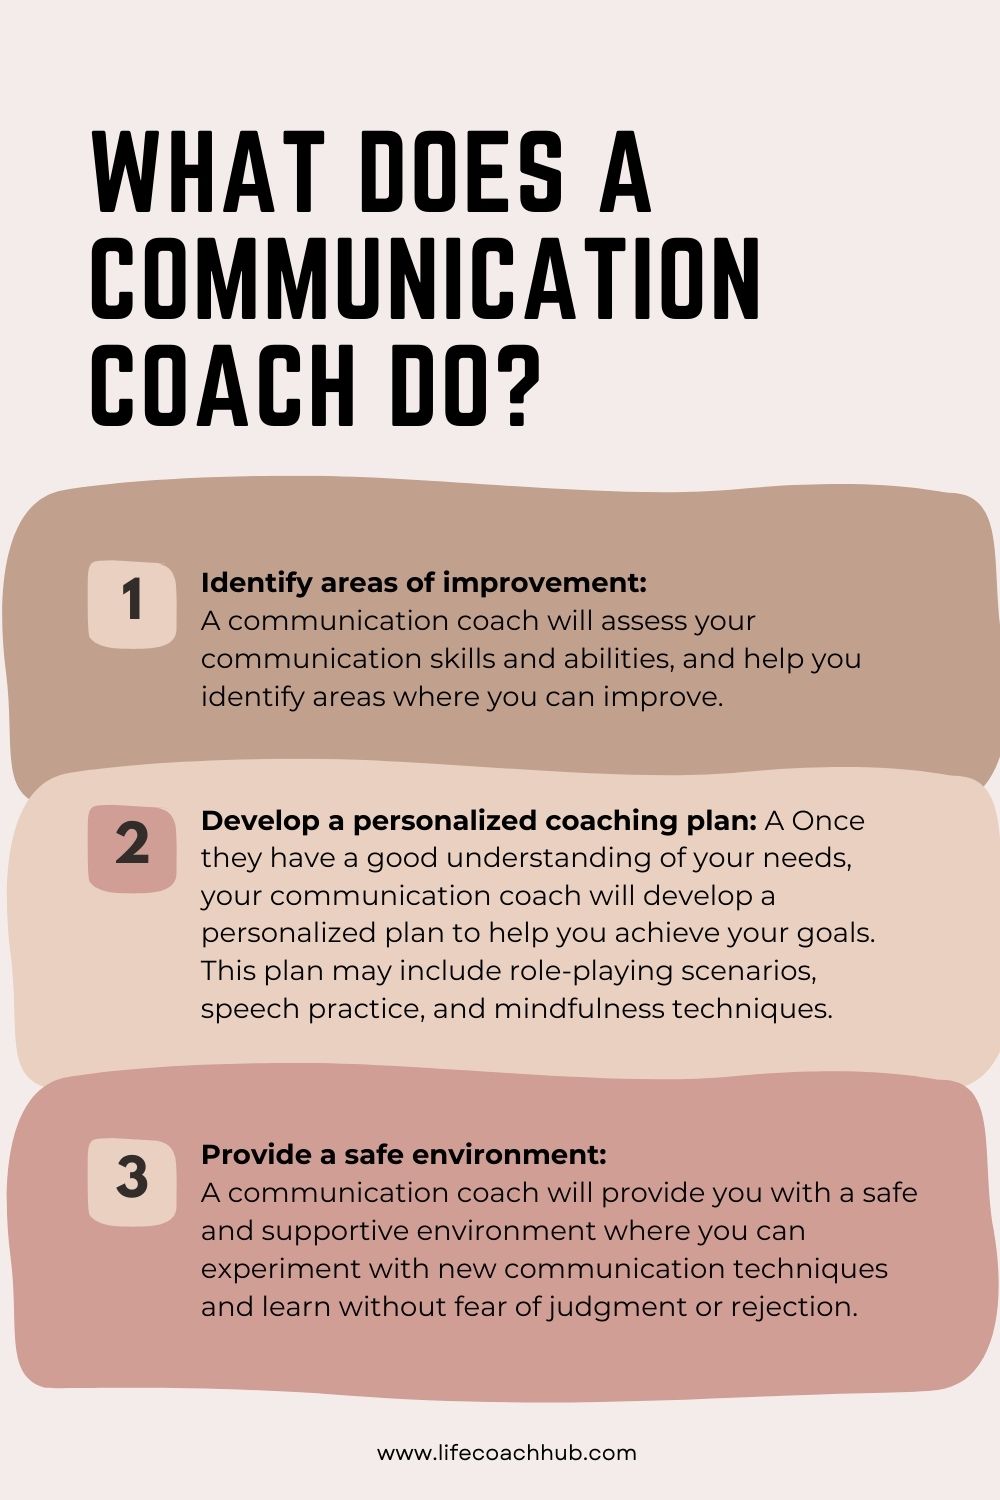 What does a communication coach do?